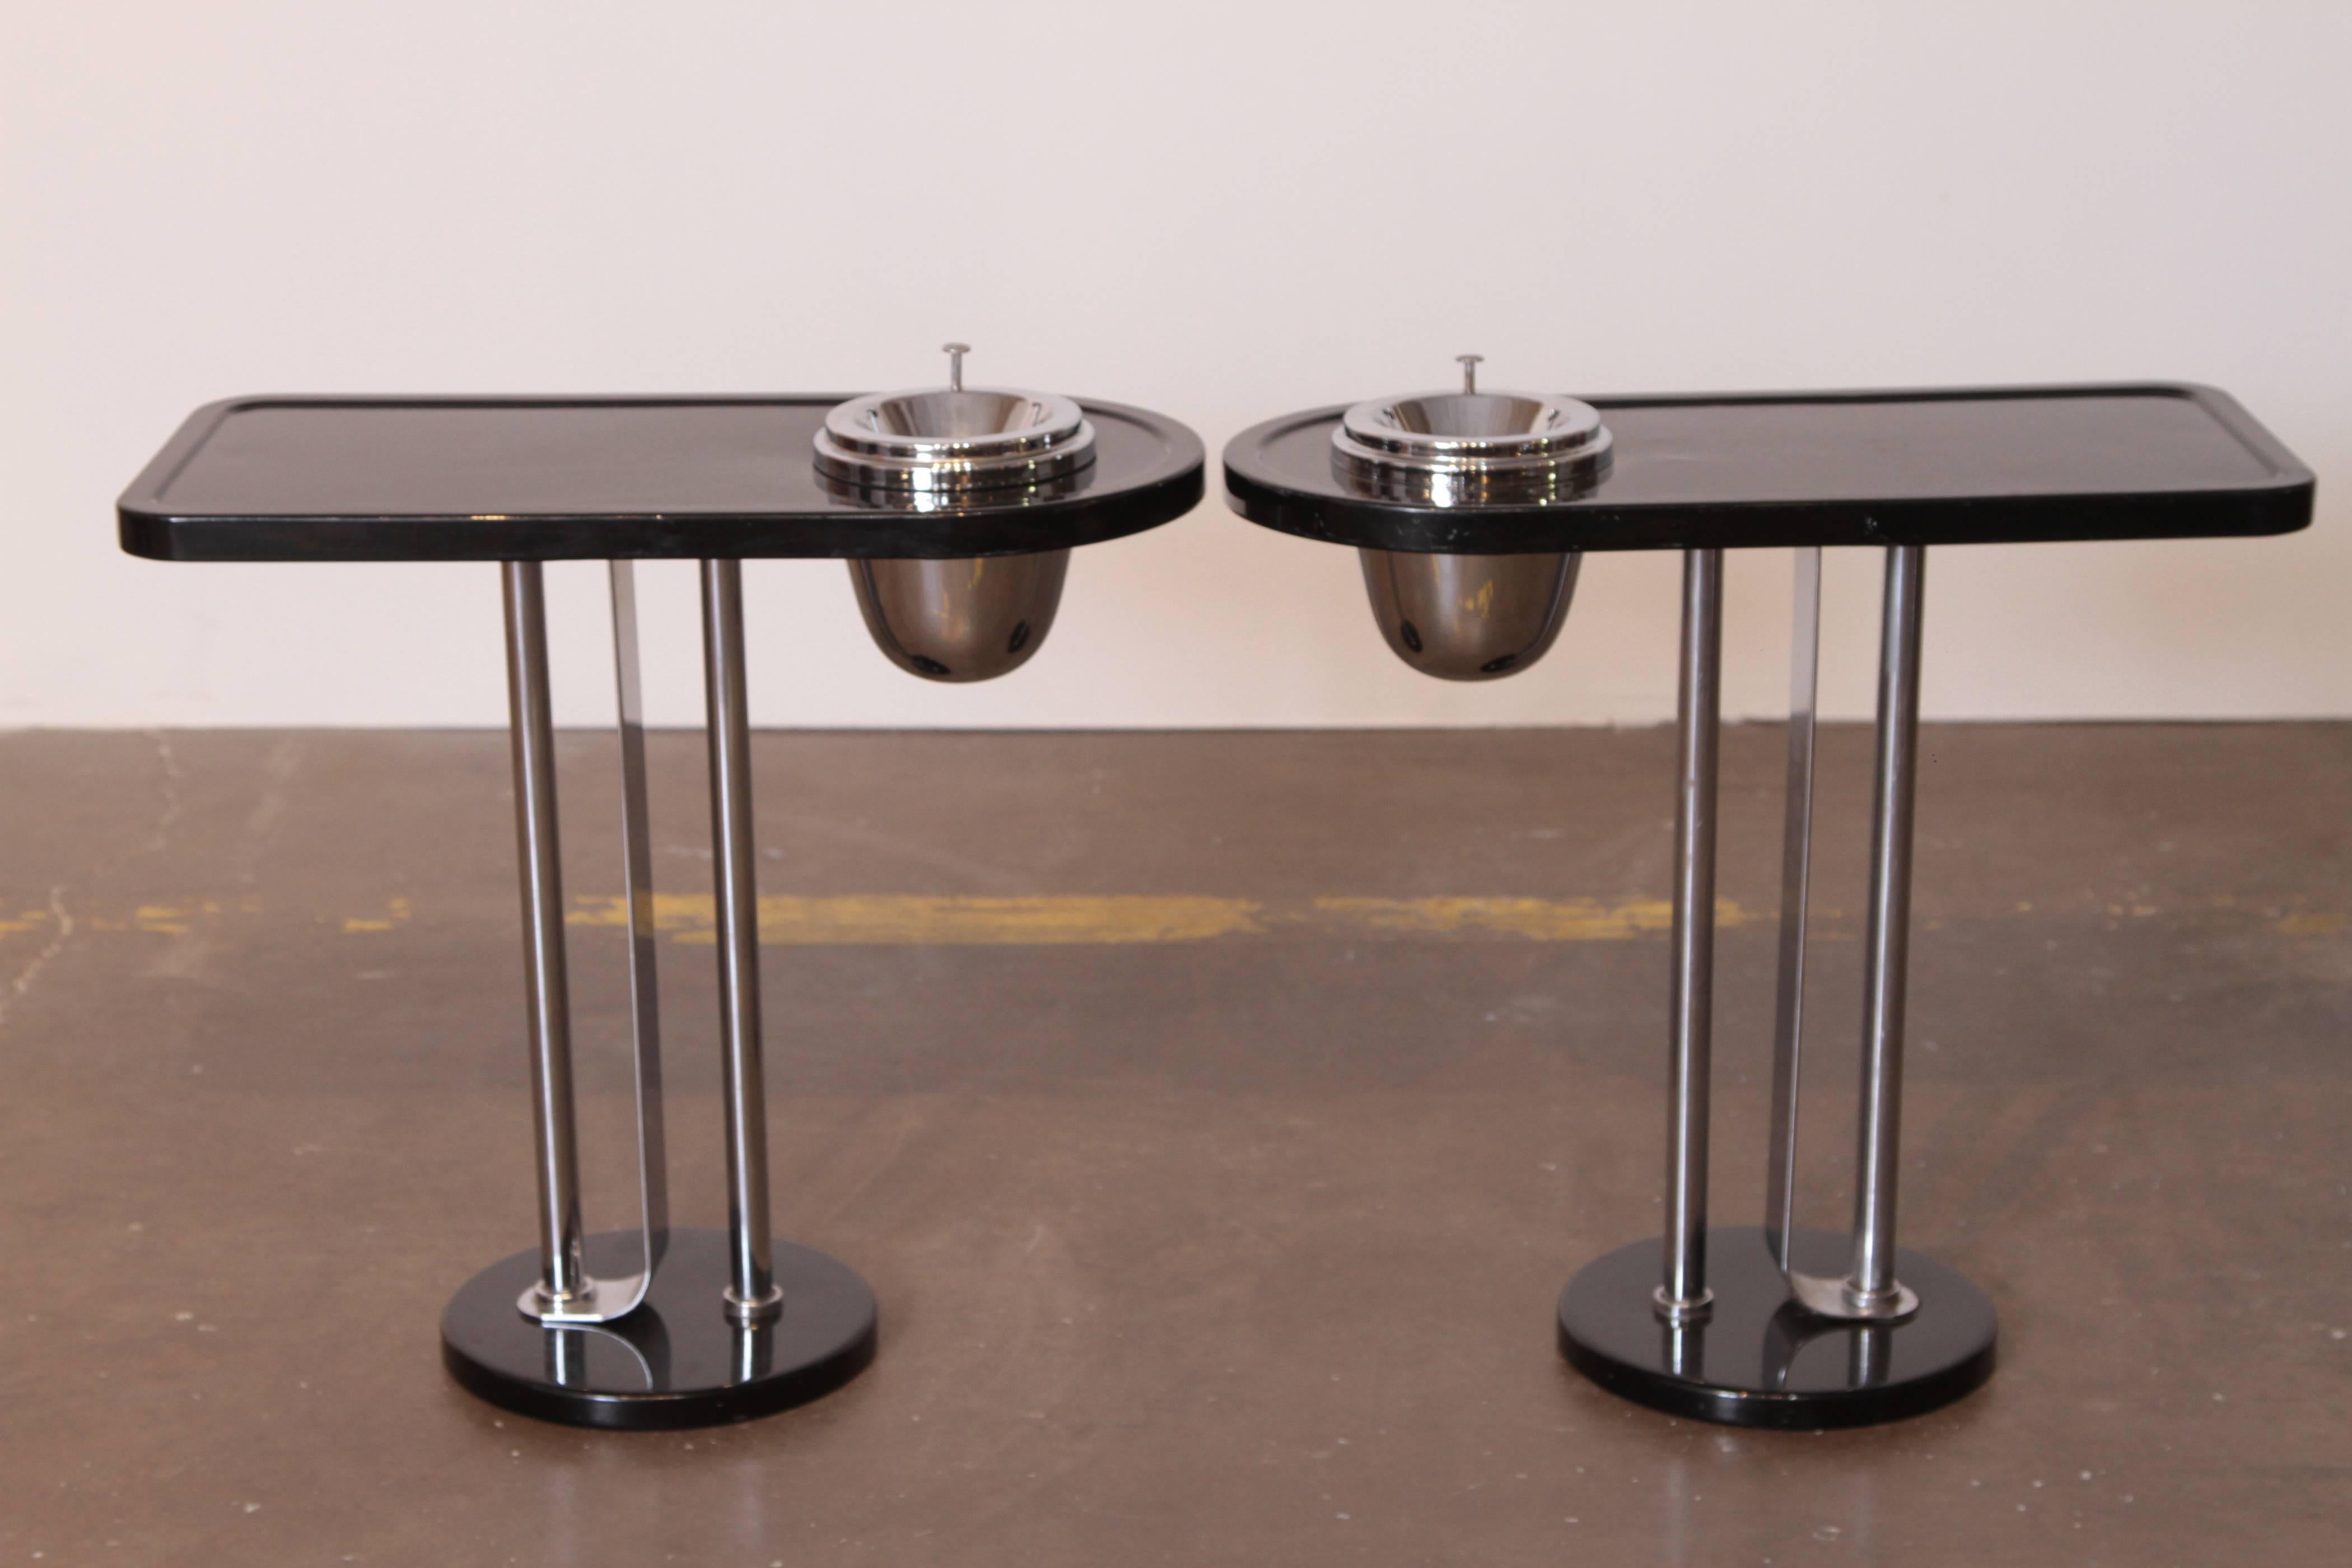 Machine Age Art Deco Wolfgang Hoffmann Smoker Tables for Howell, Signed Pair In Good Condition For Sale In Dallas, TX